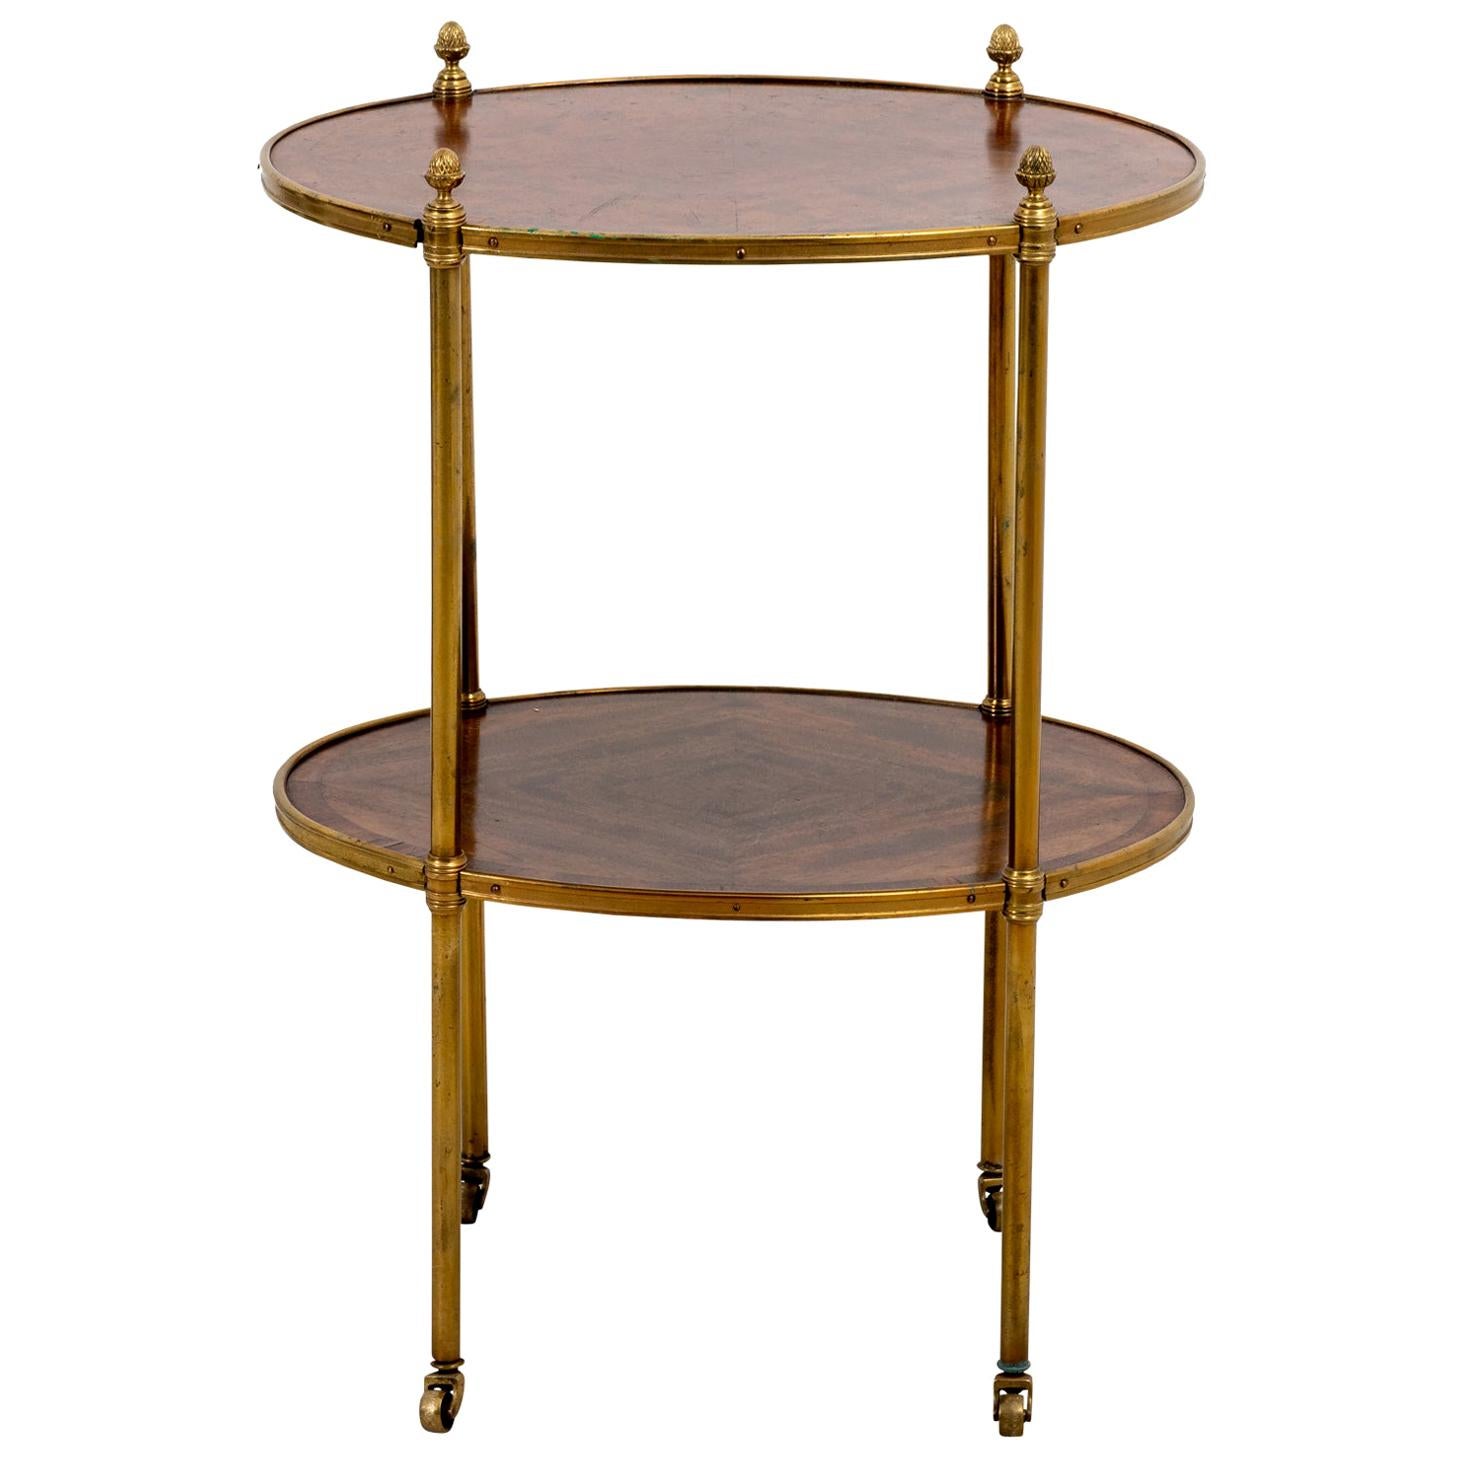 Antique oval fruitwood two tiered side table with brass banding, brass casters, and brass acorn shaped finials, circa 1930s. Made in England. Please note of wear consistent with age including patina and oxidation to the metal.